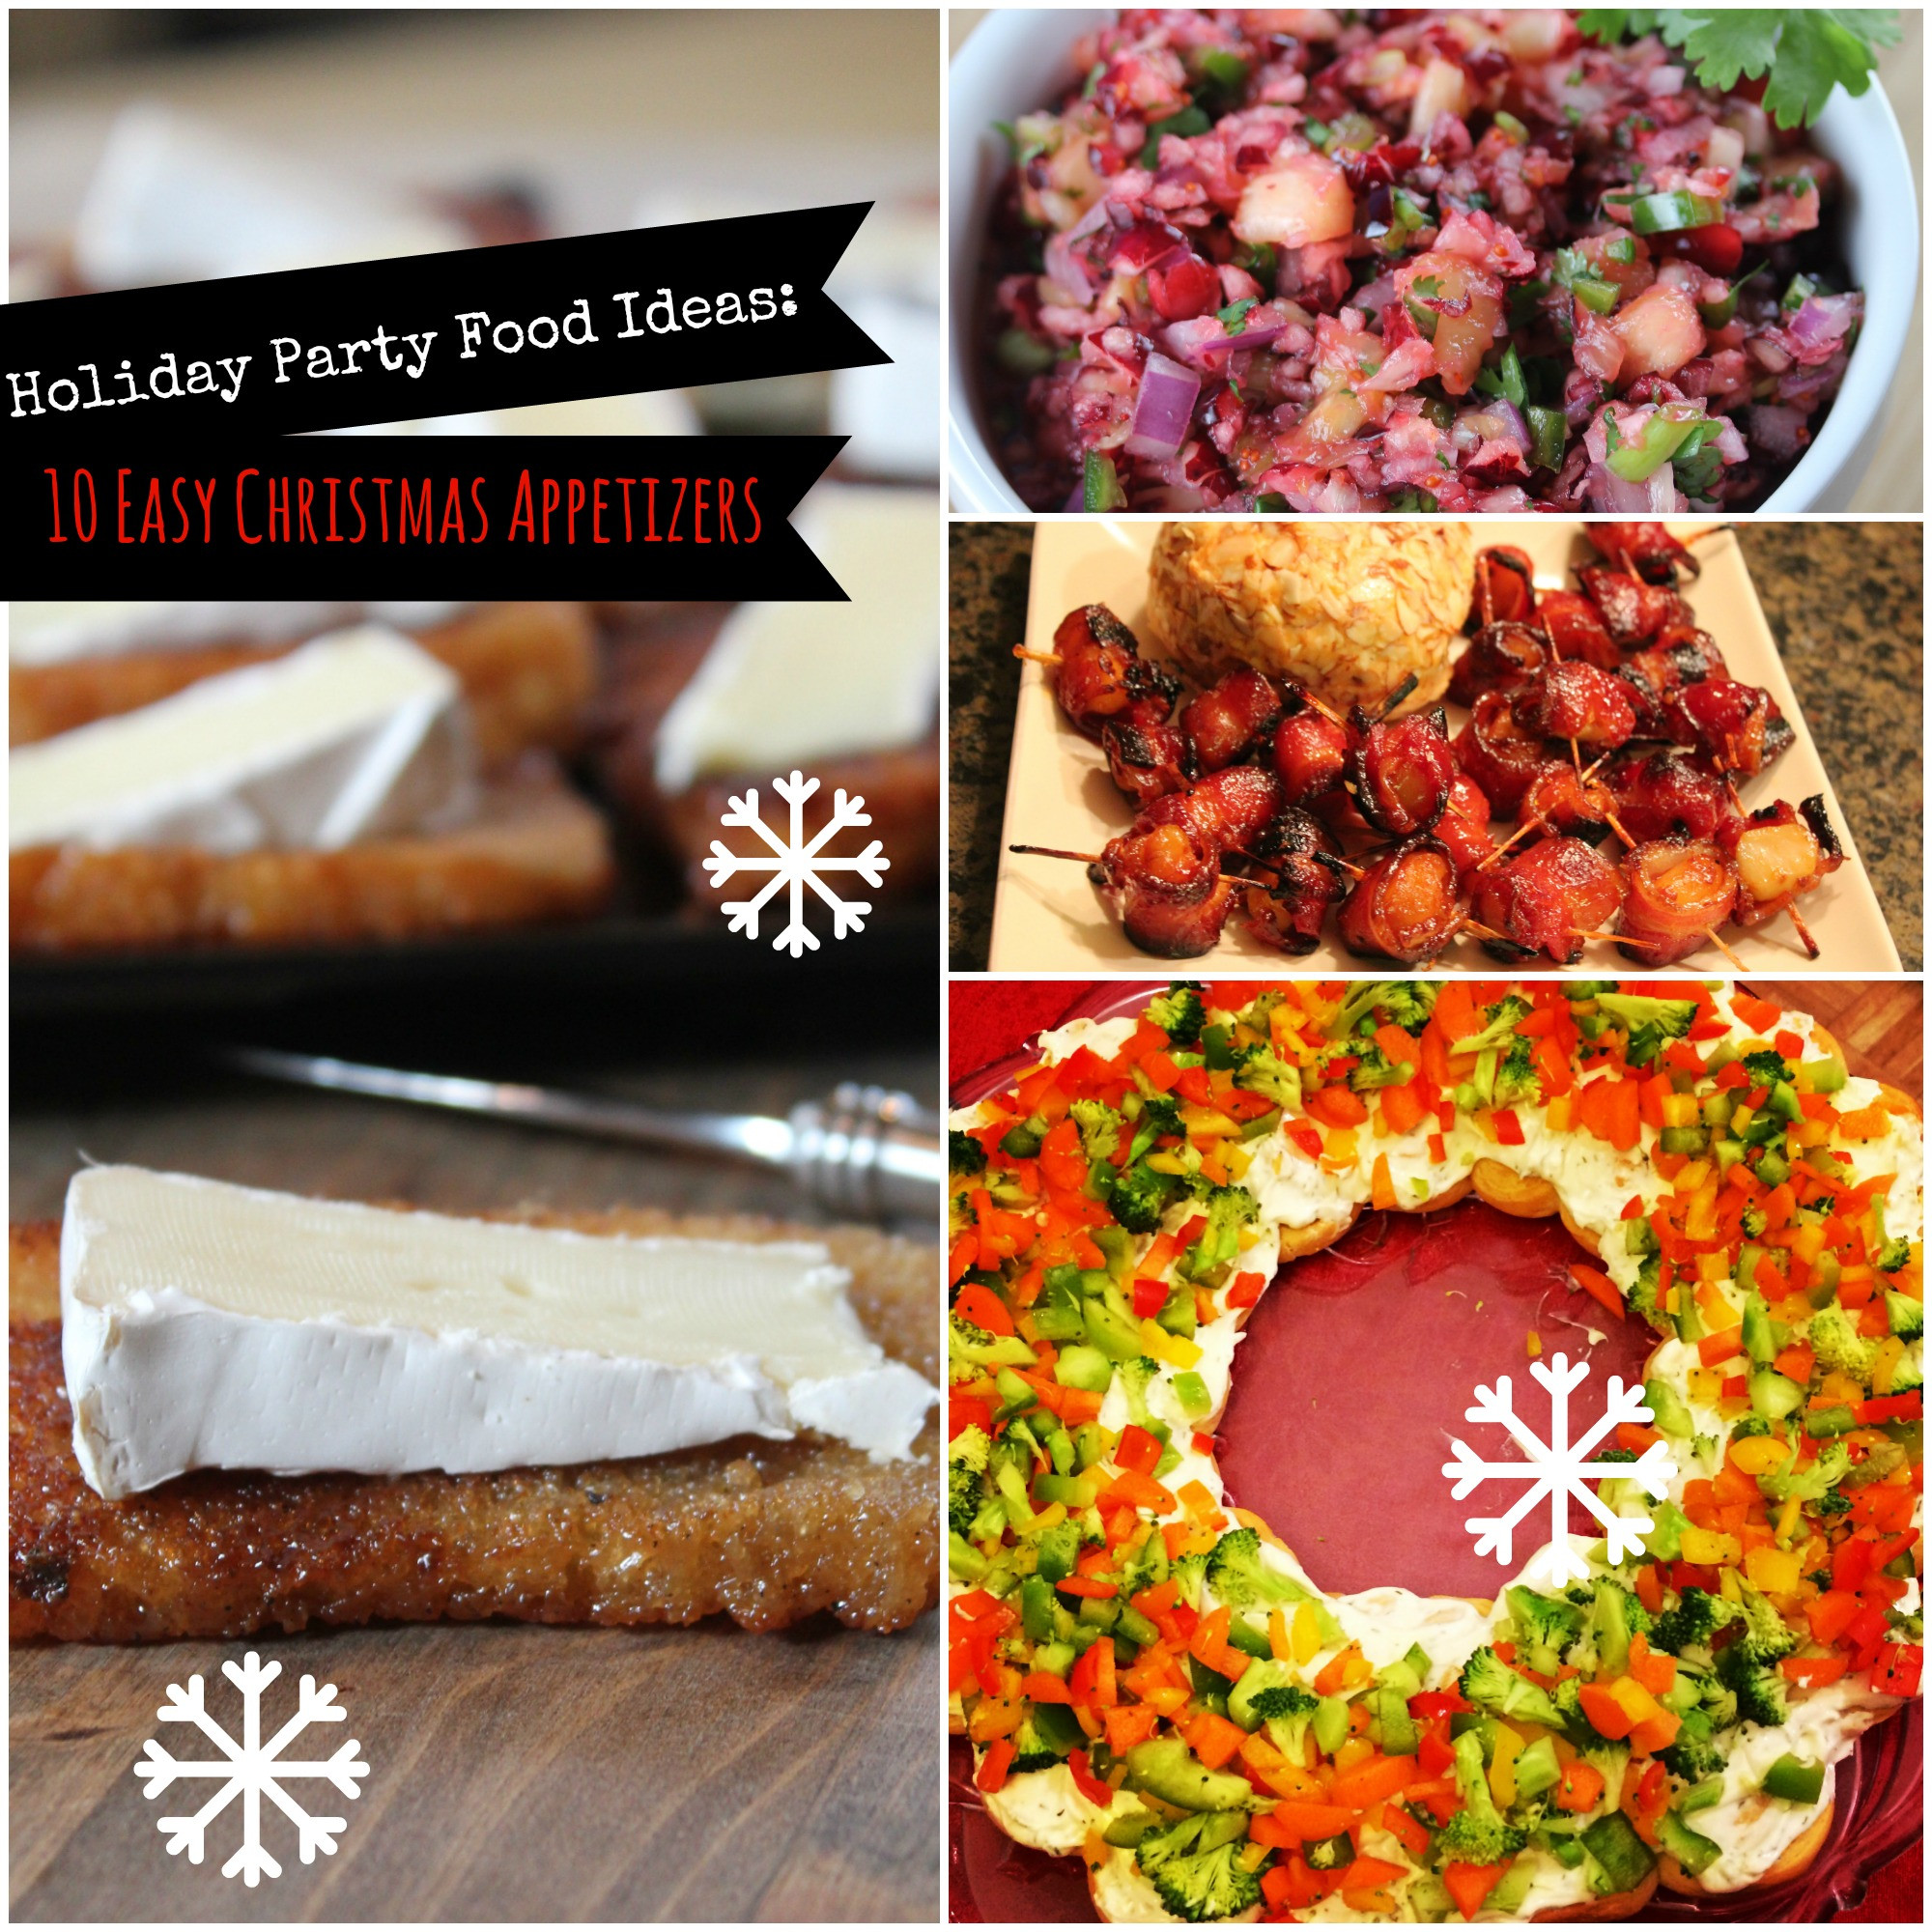 Easy Holiday Party Food Ideas
 Holiday Party Food Ideas 10 Easy Christmas Appetizers